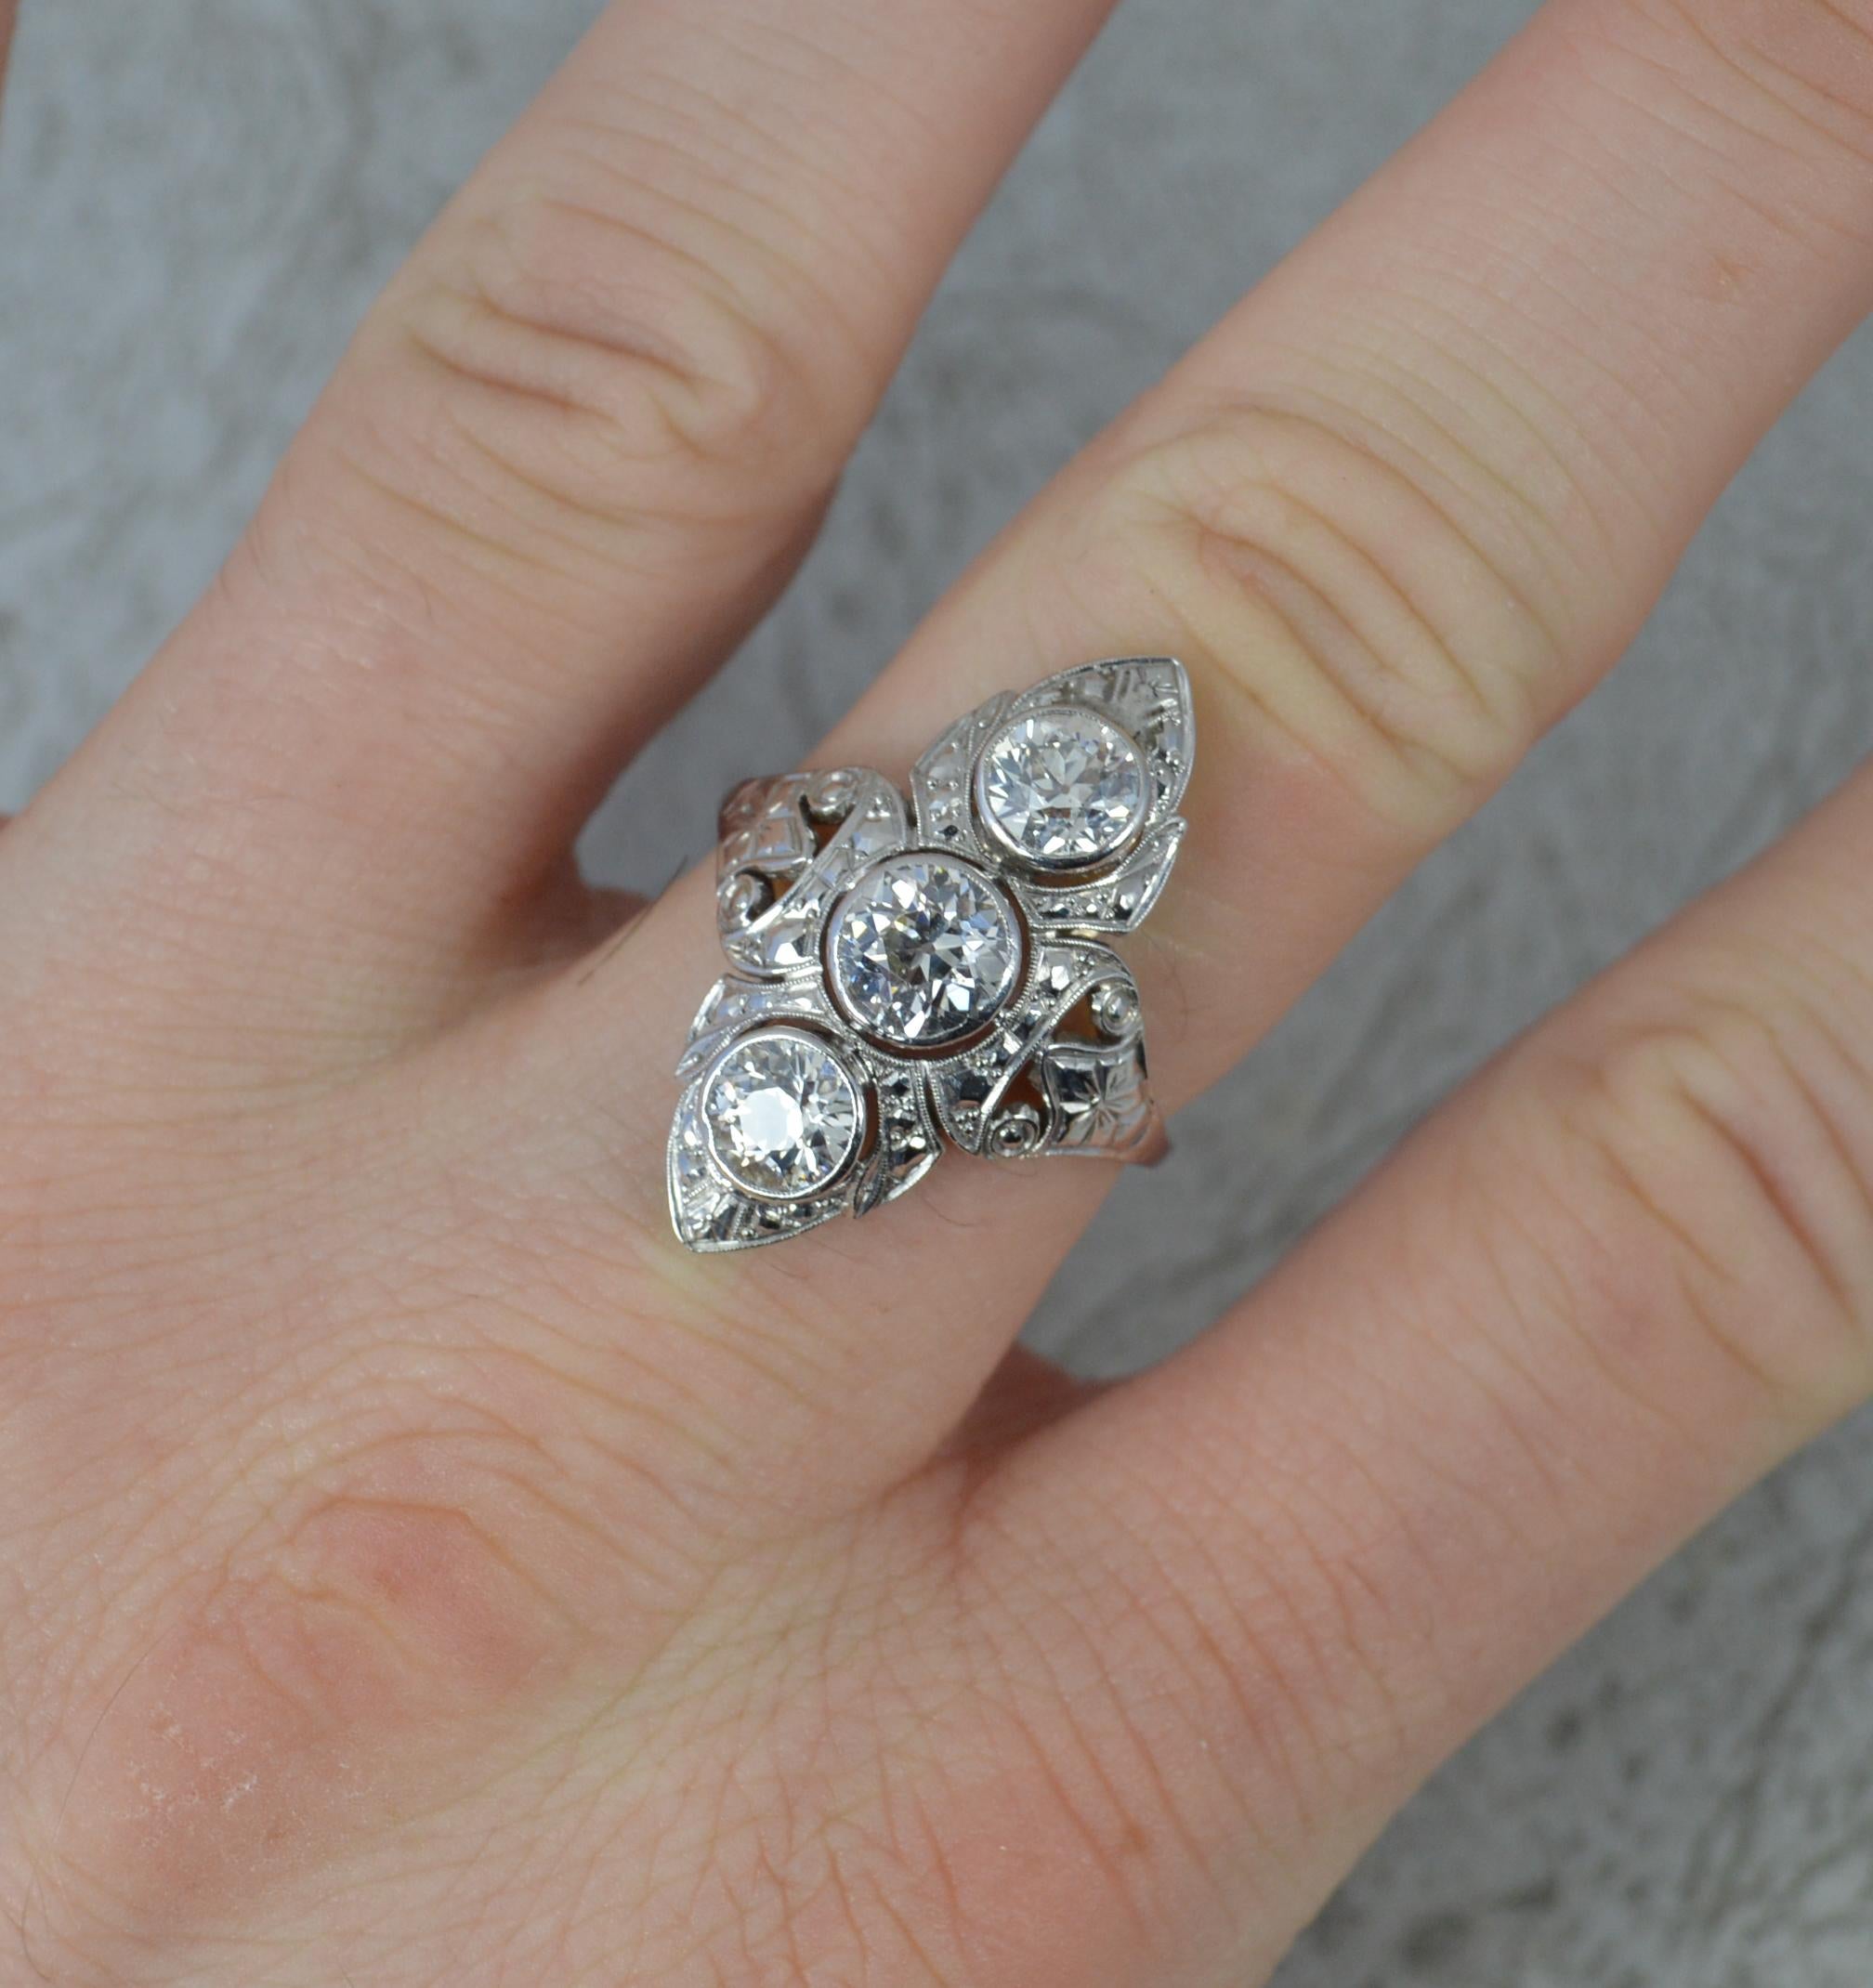 A Platinum and Diamond ladies engagement ring from circa 1910/20.
Set with three natural old European cut diamonds in full bezel settings. Total weight approx 2.10 carats. Vs clarity. Bright, white and sparkly.
Designed as a navette or panel shaped